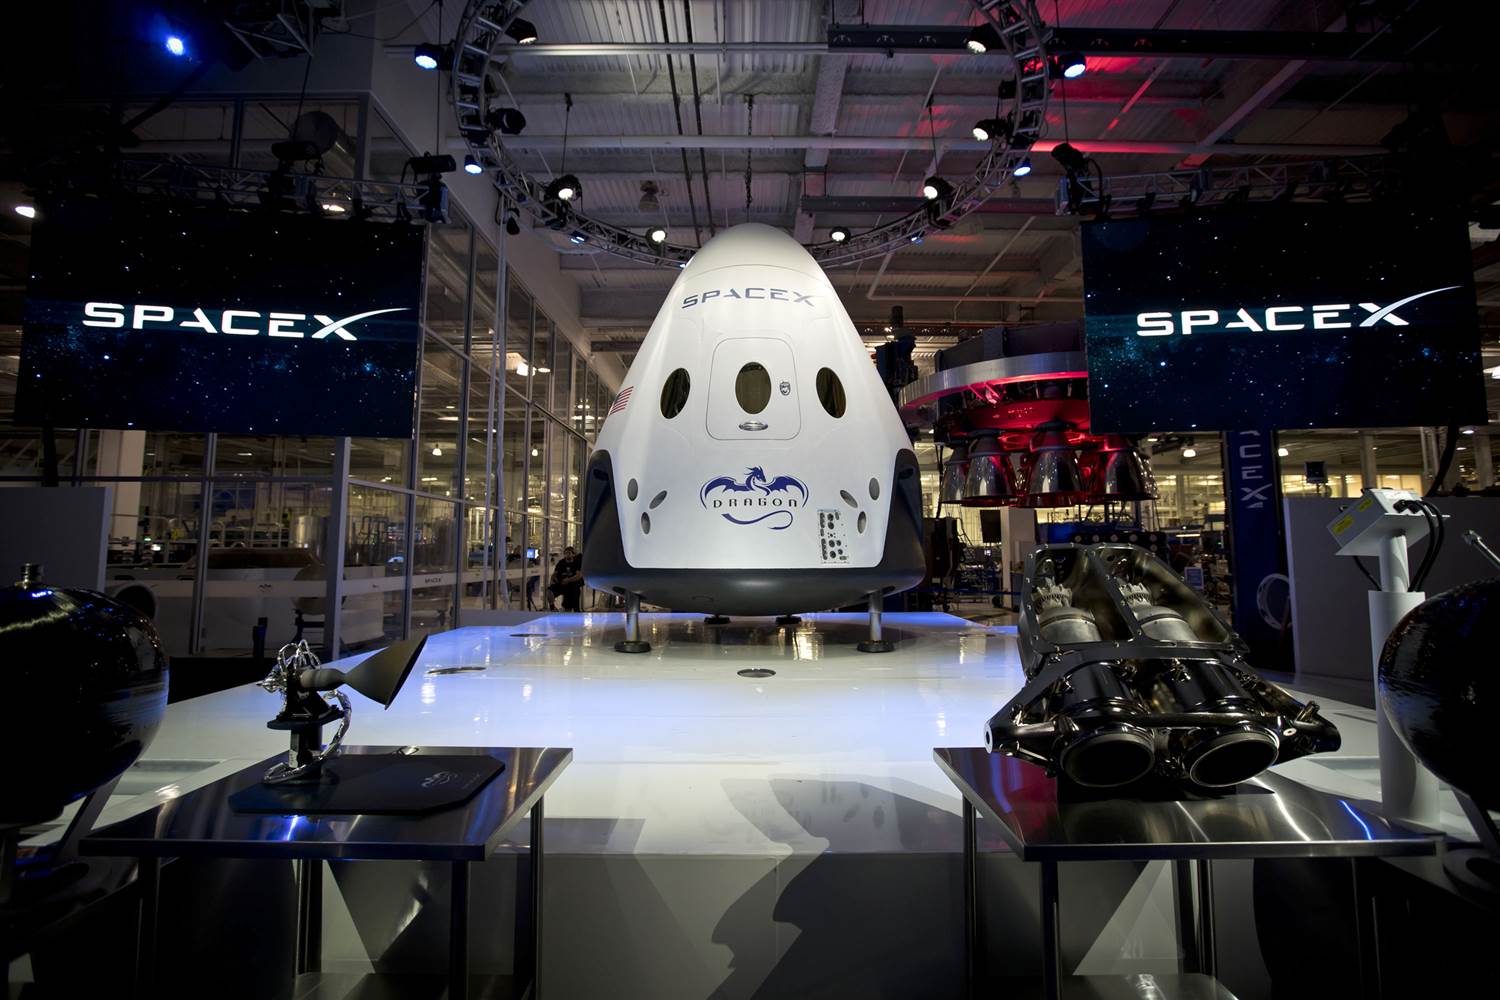 SpaceX plans to send private passengers to Moon!